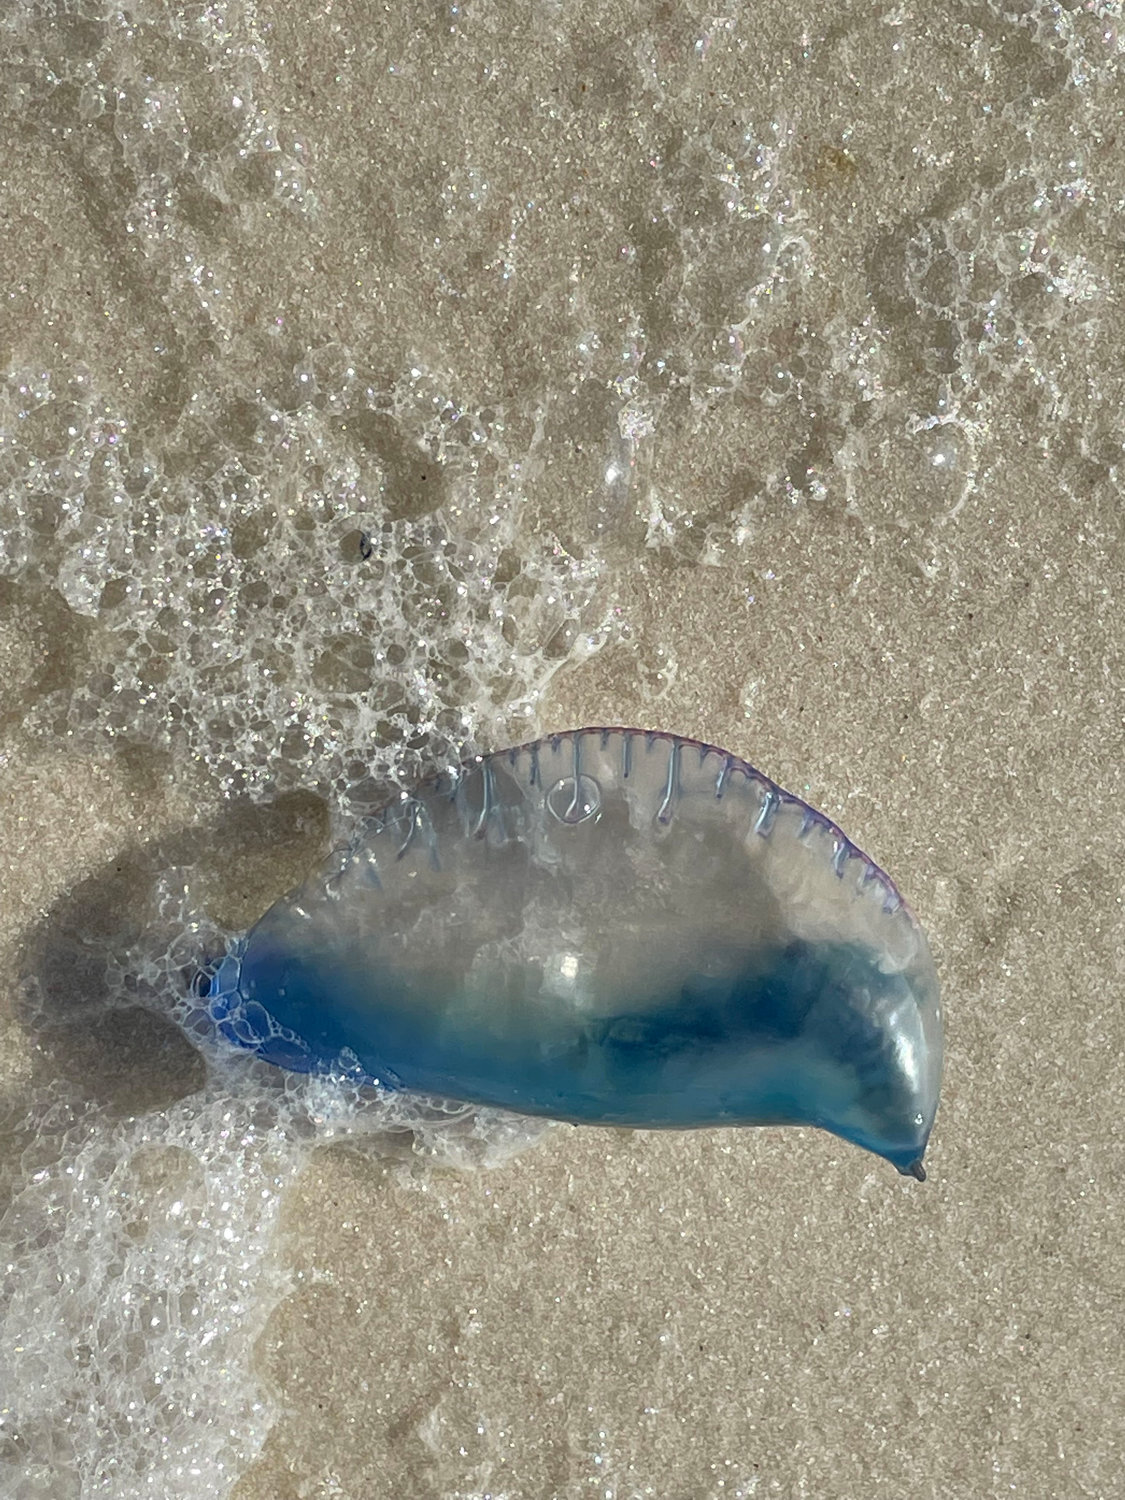 This Portuguese man o' war arrived on a Gulf Shores beach earlier in the year. While the stinging creatures can be found in Alabama waters, jellyfish are more commonly seen by swimmers and can pack a painful sting. Purple flags flying over Gulf Shores and Orange Beach warn swimmers to be aware of the creatures' tentacles.